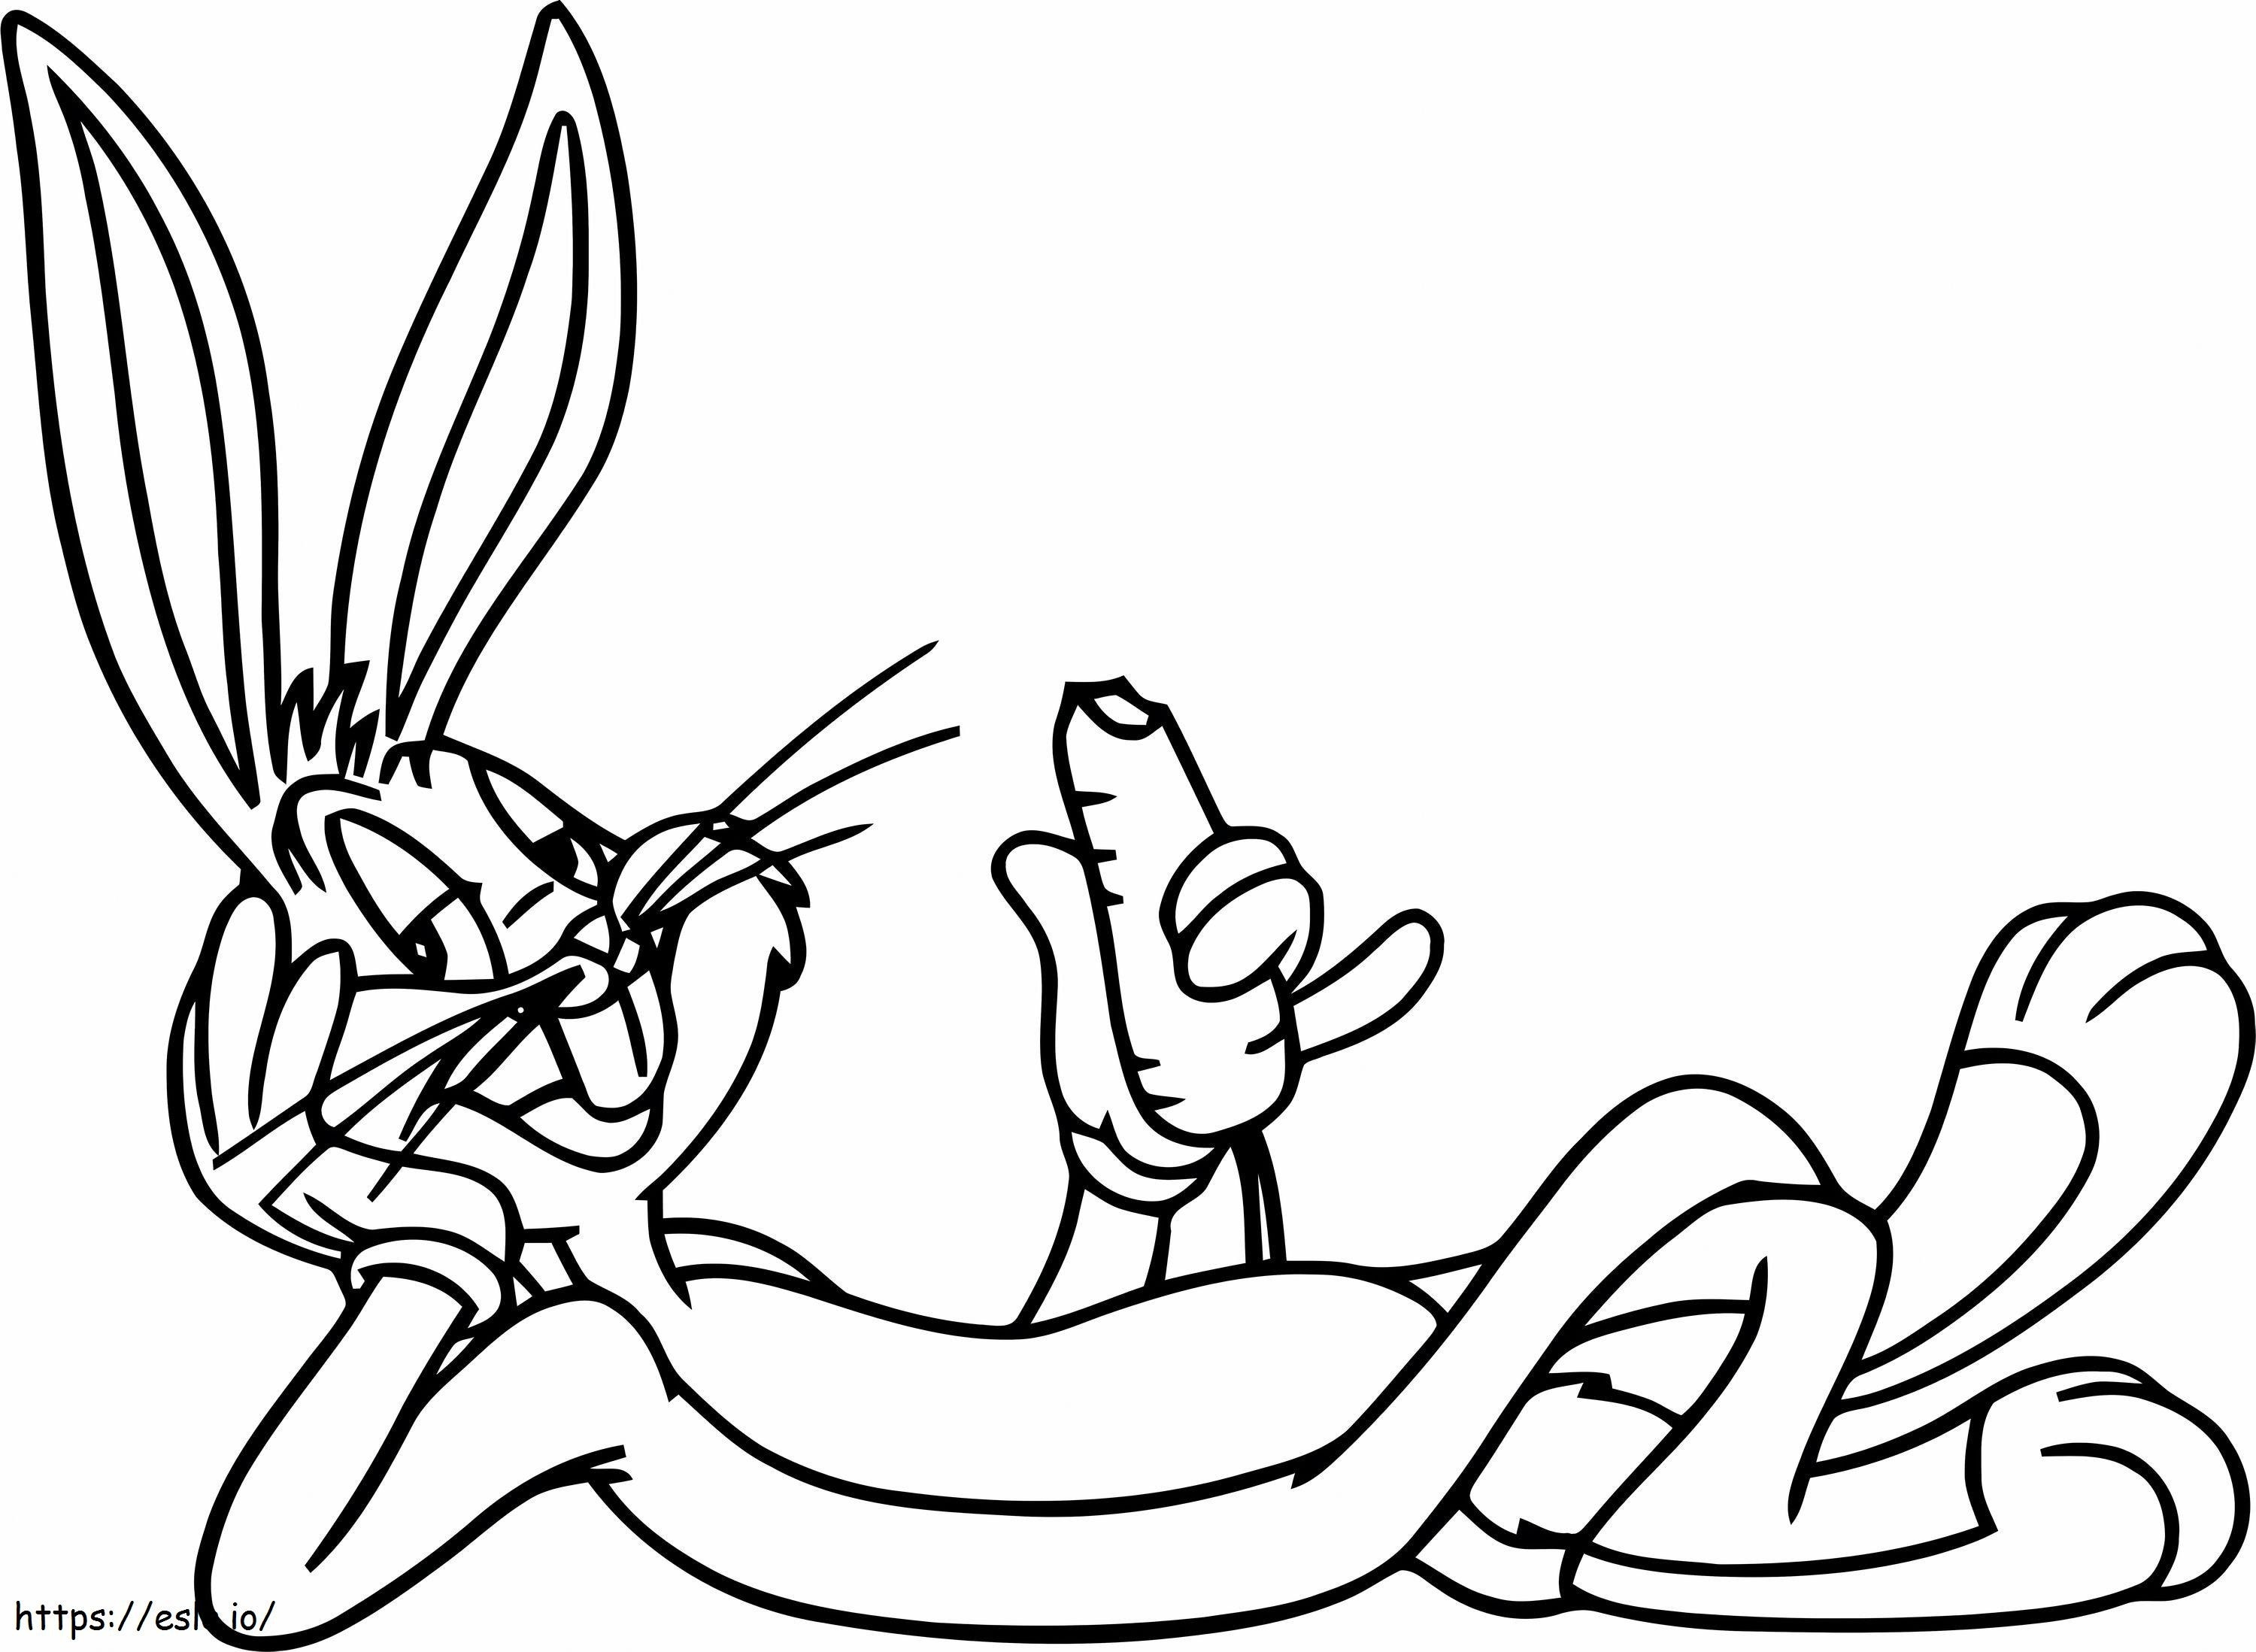 Bugs Bunny Eating Carrot Scaled coloring page